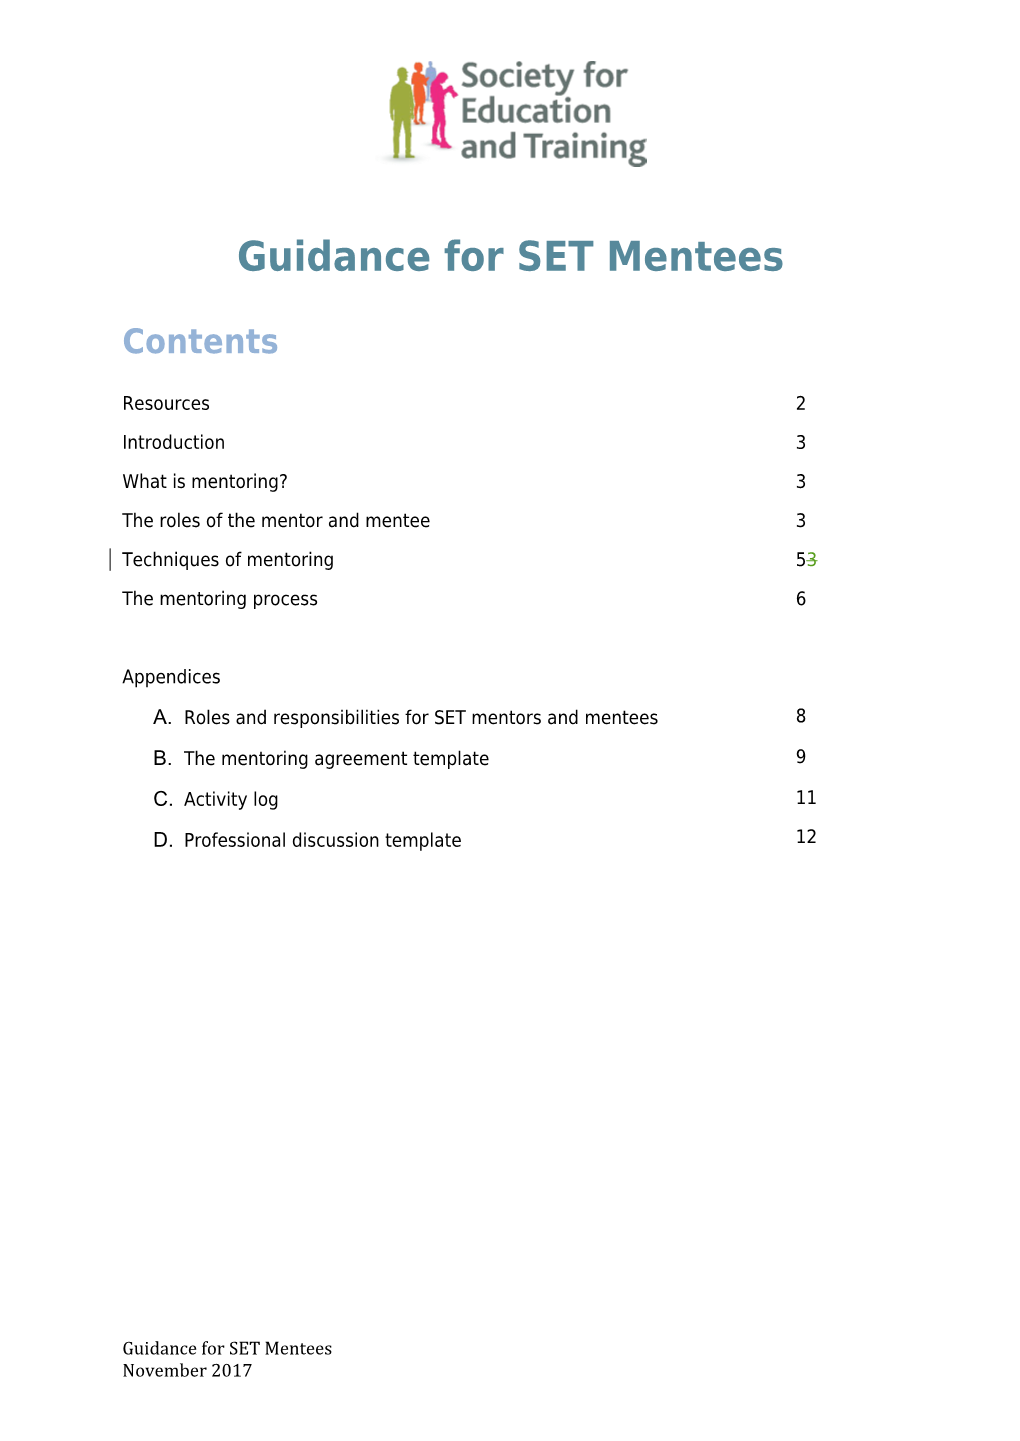 Guidance for SET Mentees